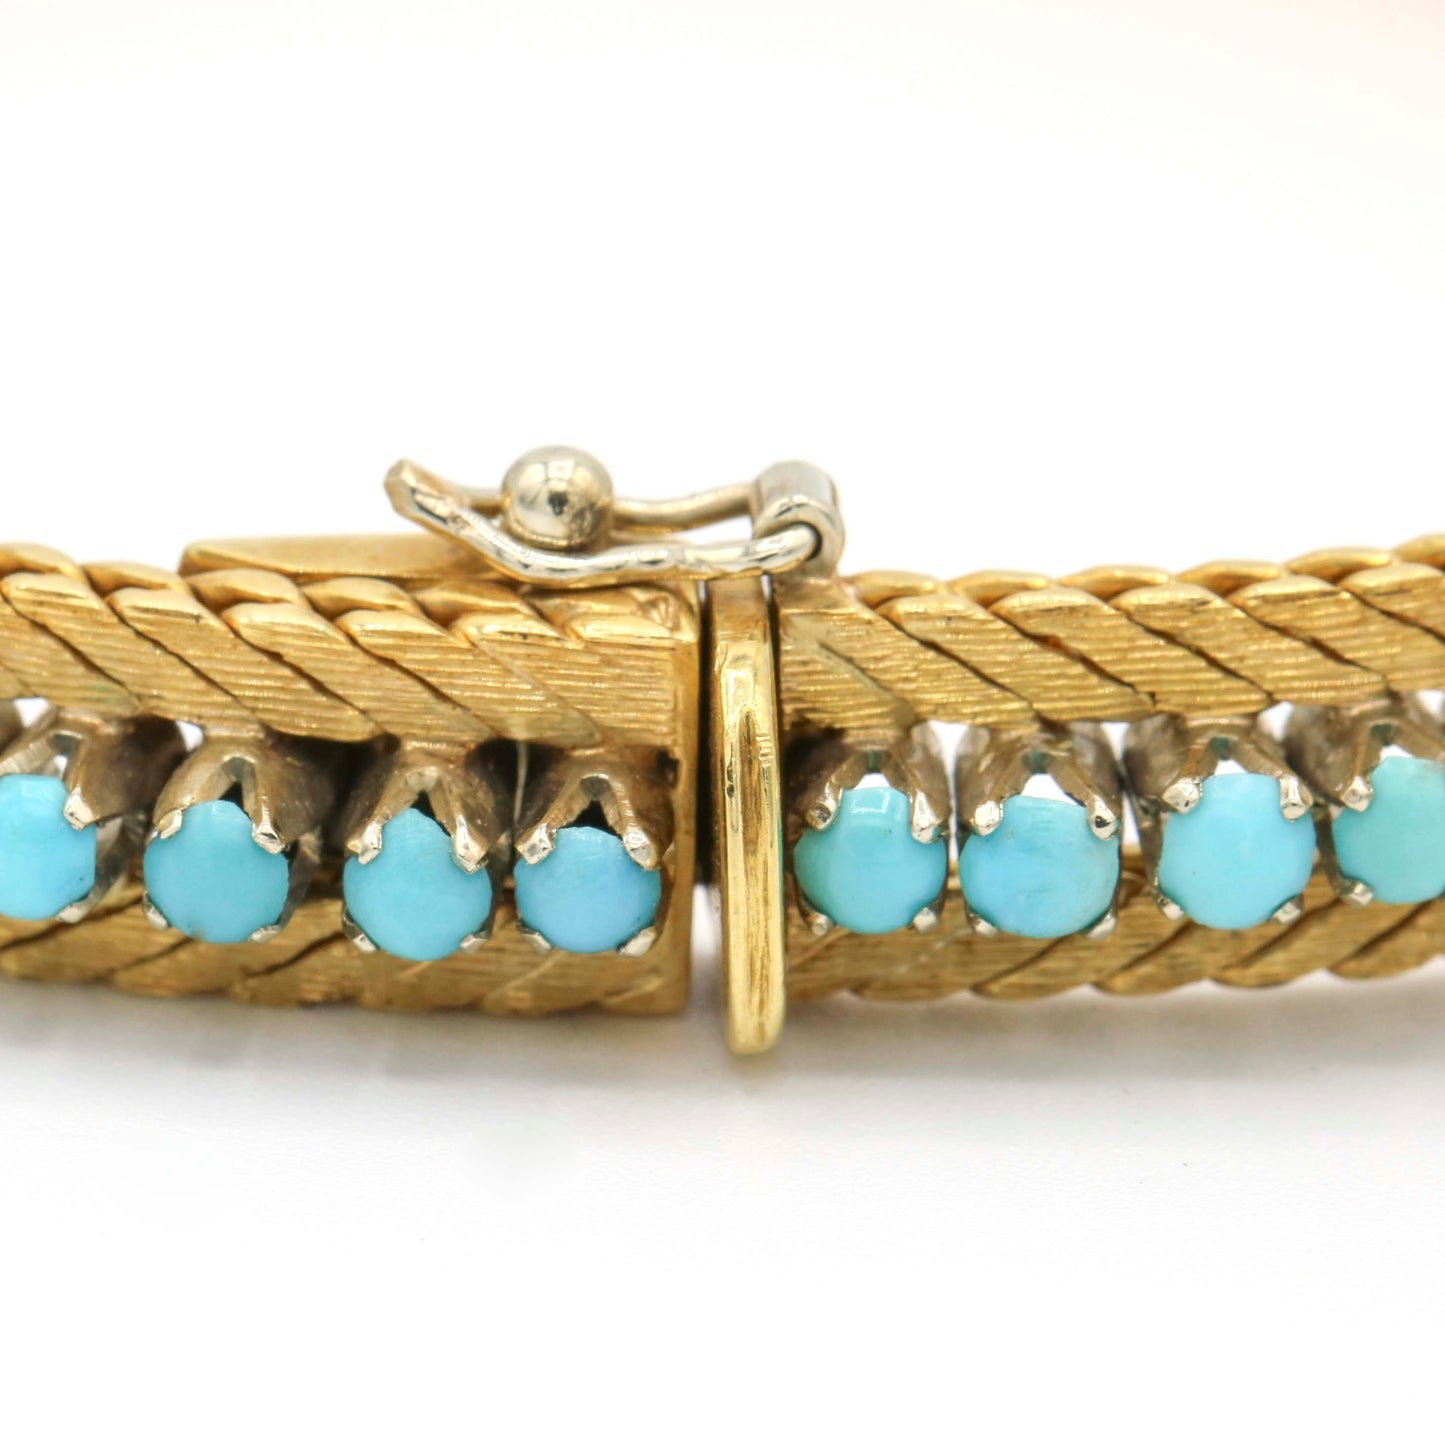 Women's Vintage Turquoise Textured Snake Chain Bracelet in 18k Yellow Gold